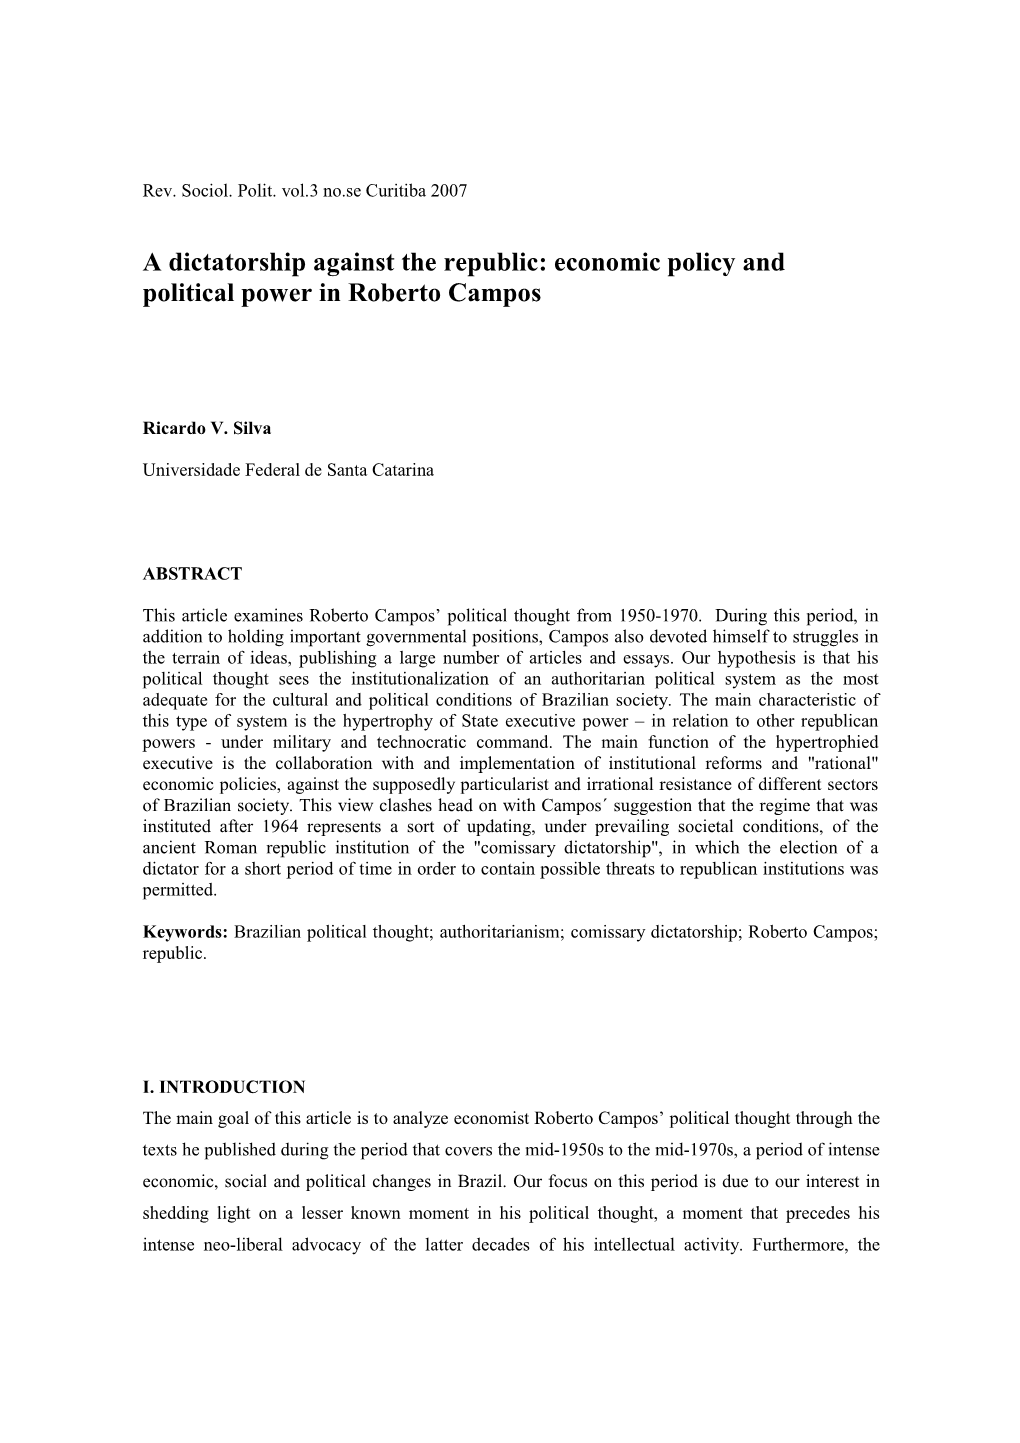 A Dictatorship Against the Republic: Economic Policy and Political Power in Roberto Campos